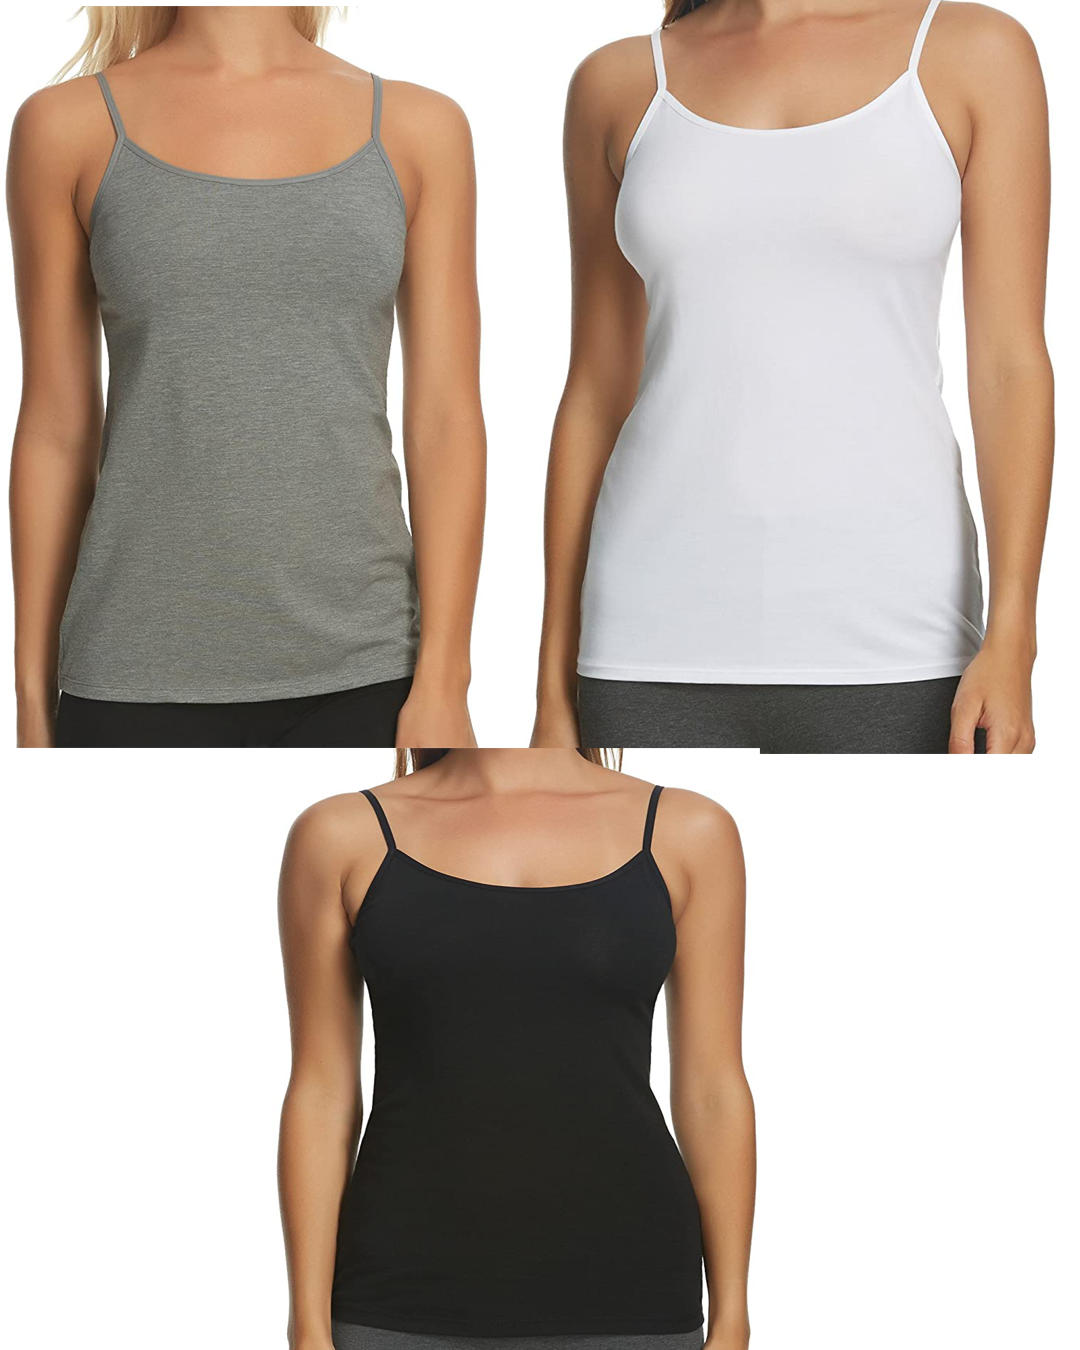 Felina Womens Cotton Stretch 3-Pack Camisole